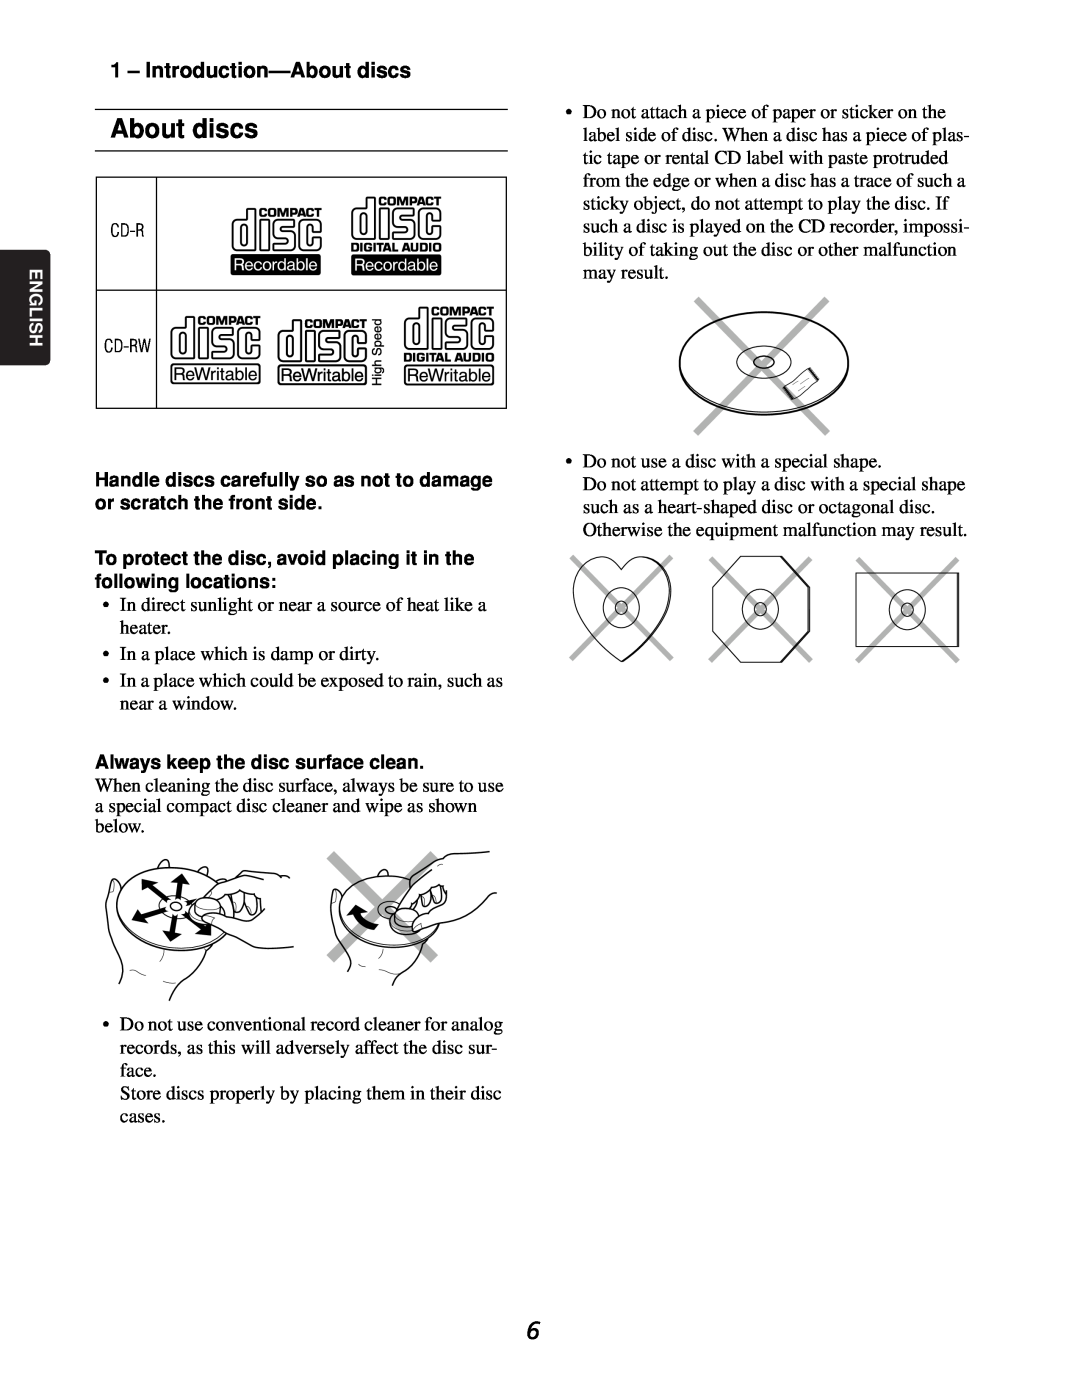 Marantz CDR632 manual About discs, Introduction-Aboutdiscs, Always keep the disc surface clean 